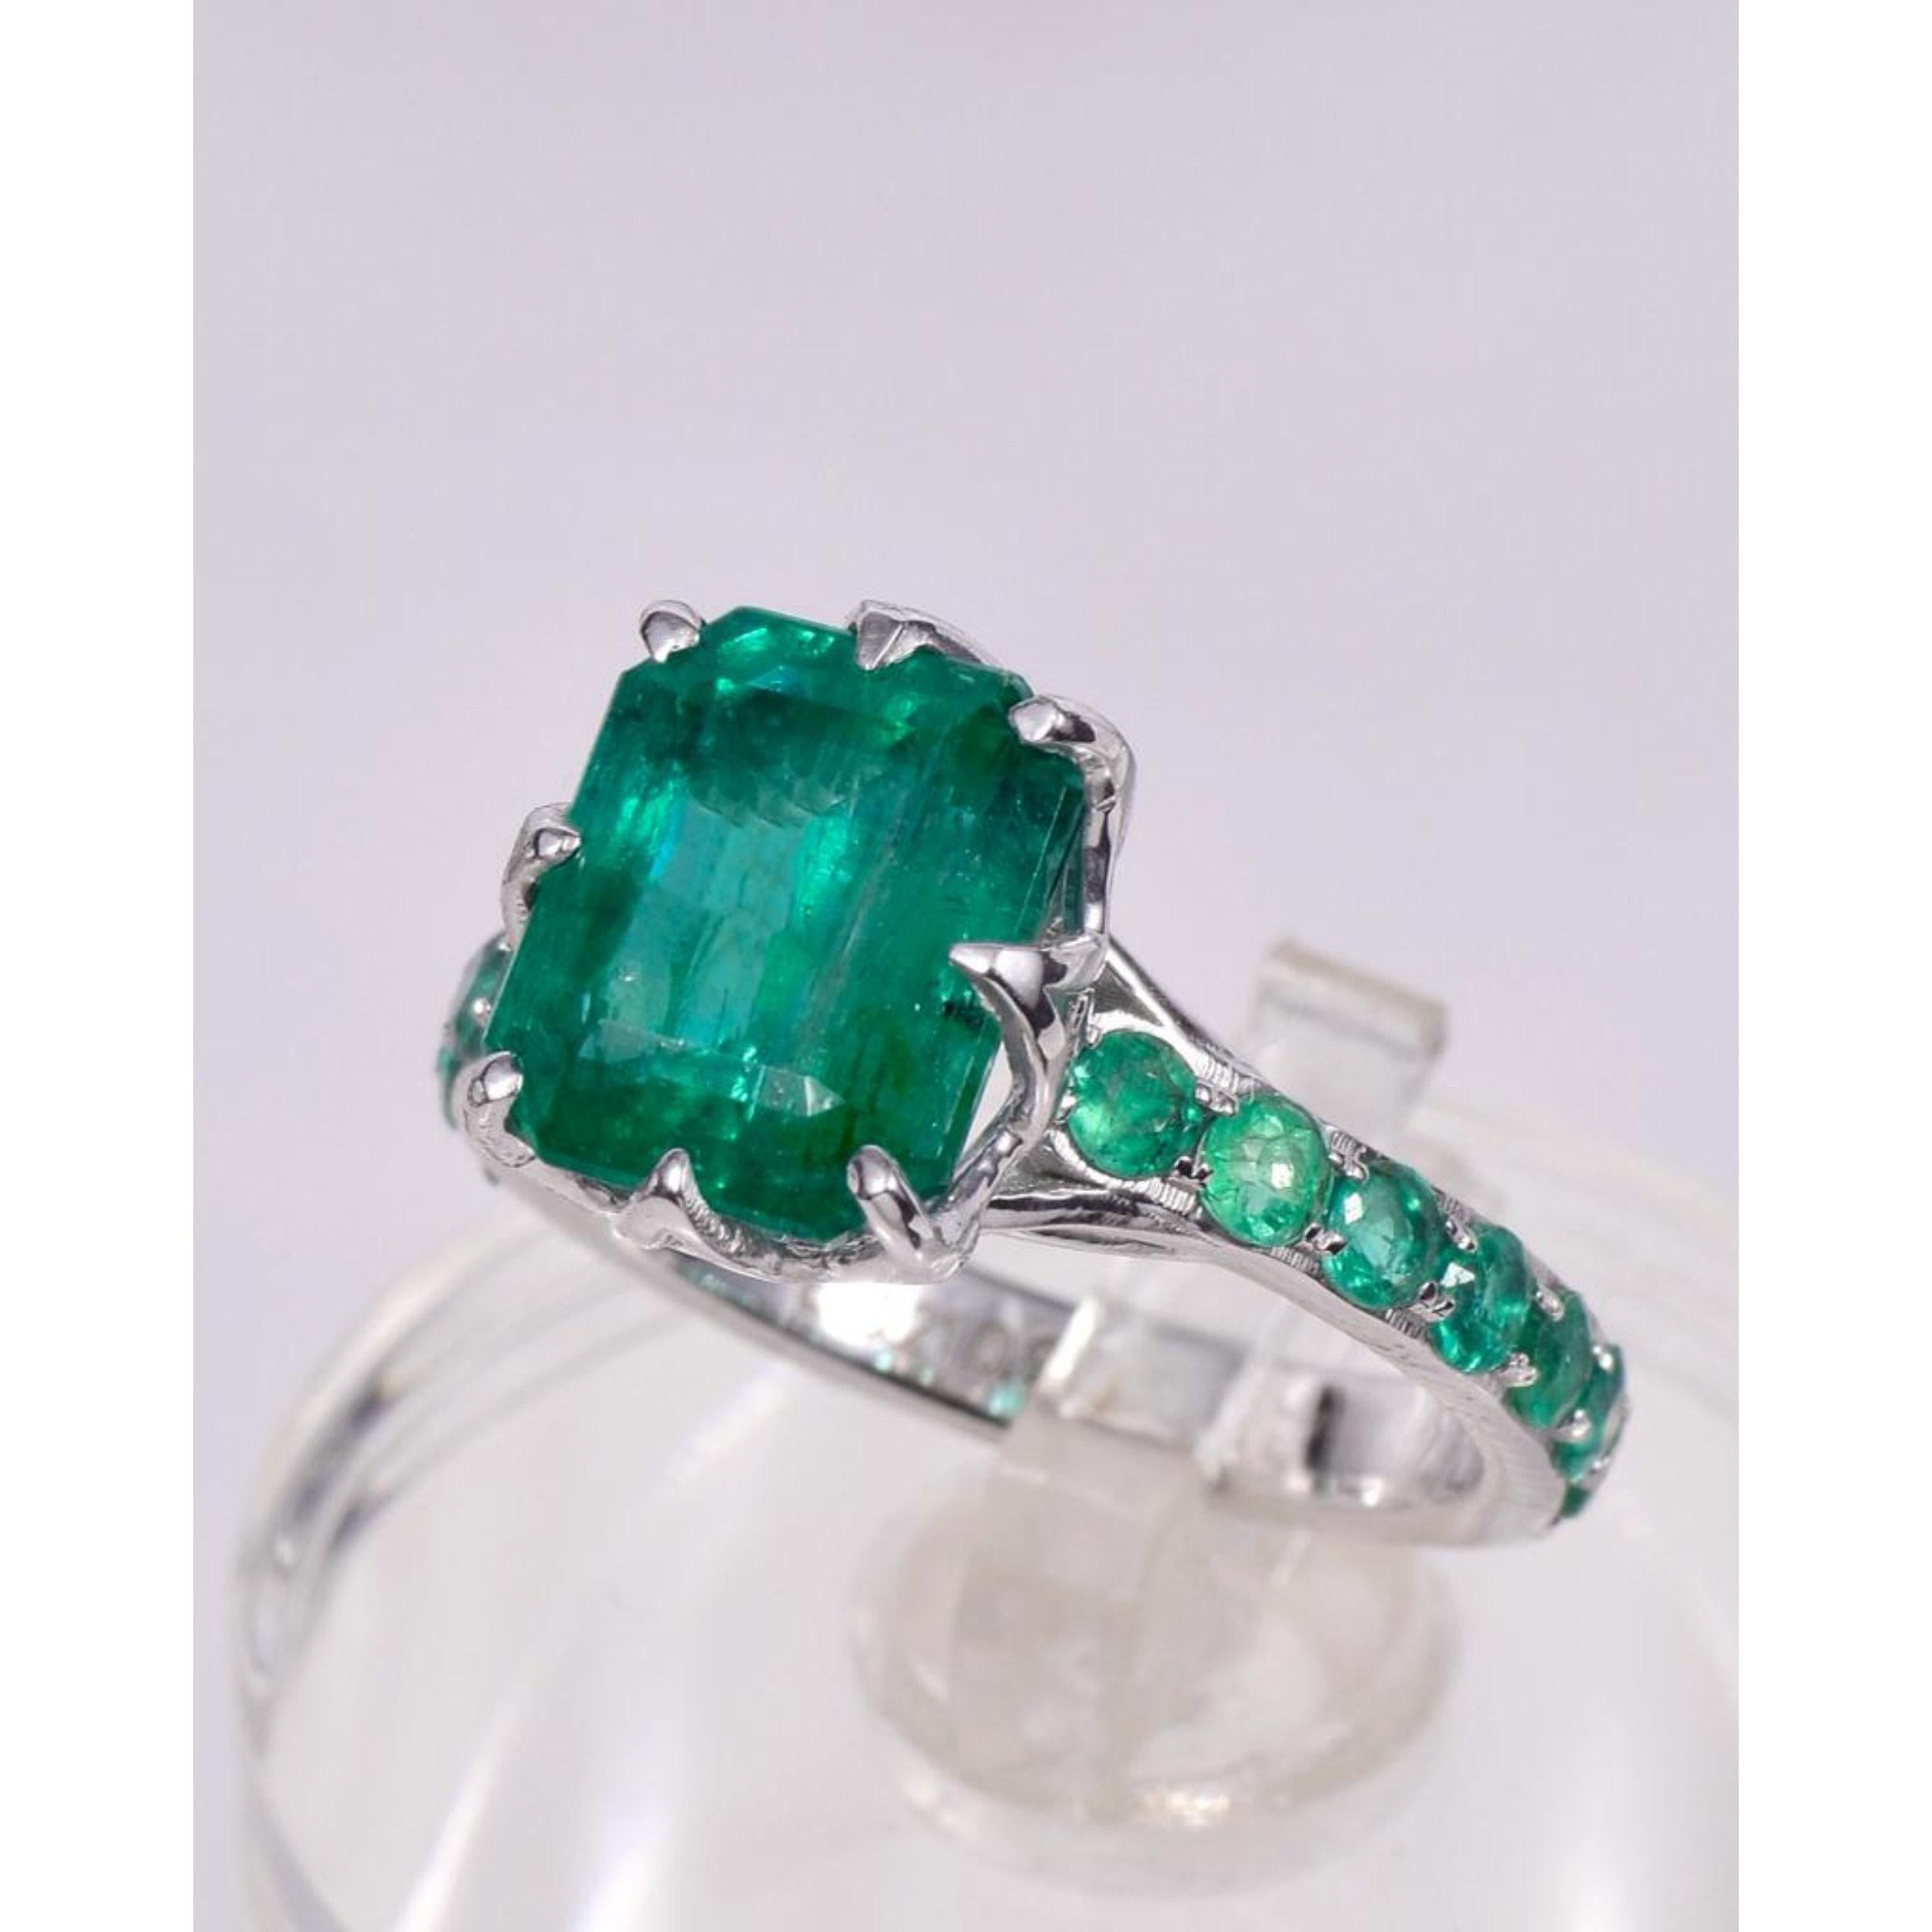 For Sale:  3 Carat Emerald Statement Ring, Natural Emerald Engagement Ring 4